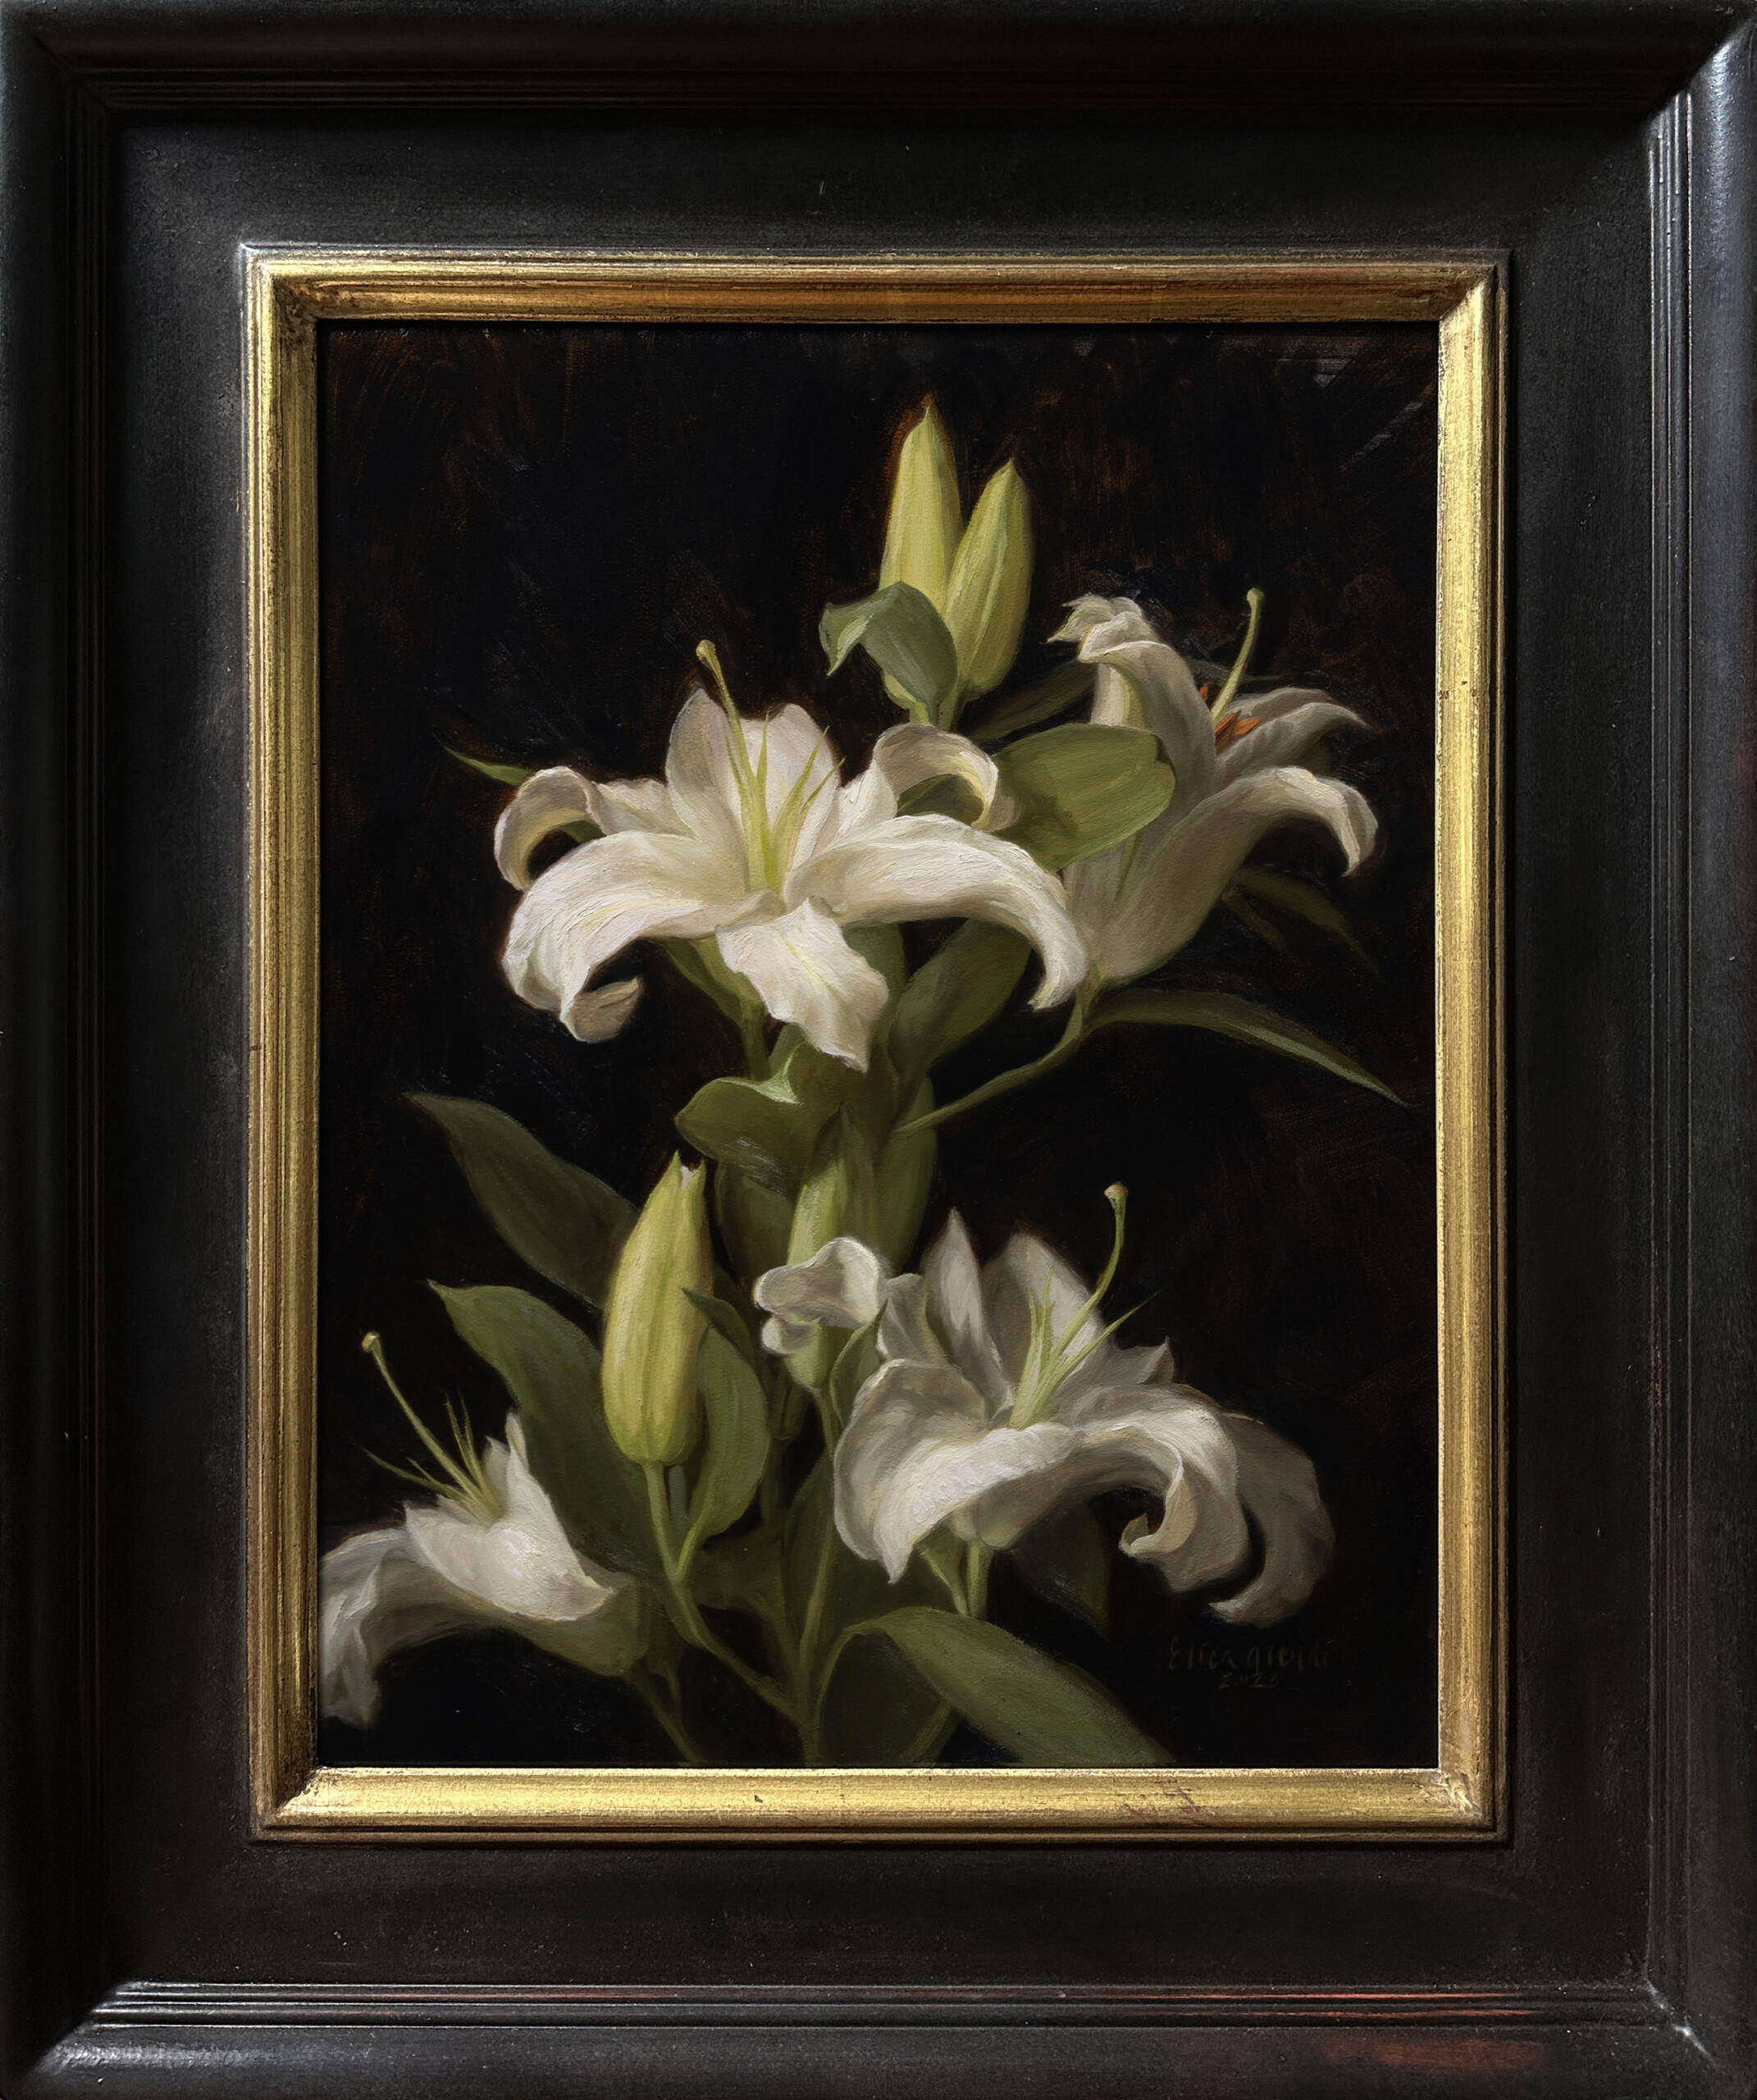 "Moonlight in Bloom" in a black wooden frame with a golden inner edge.